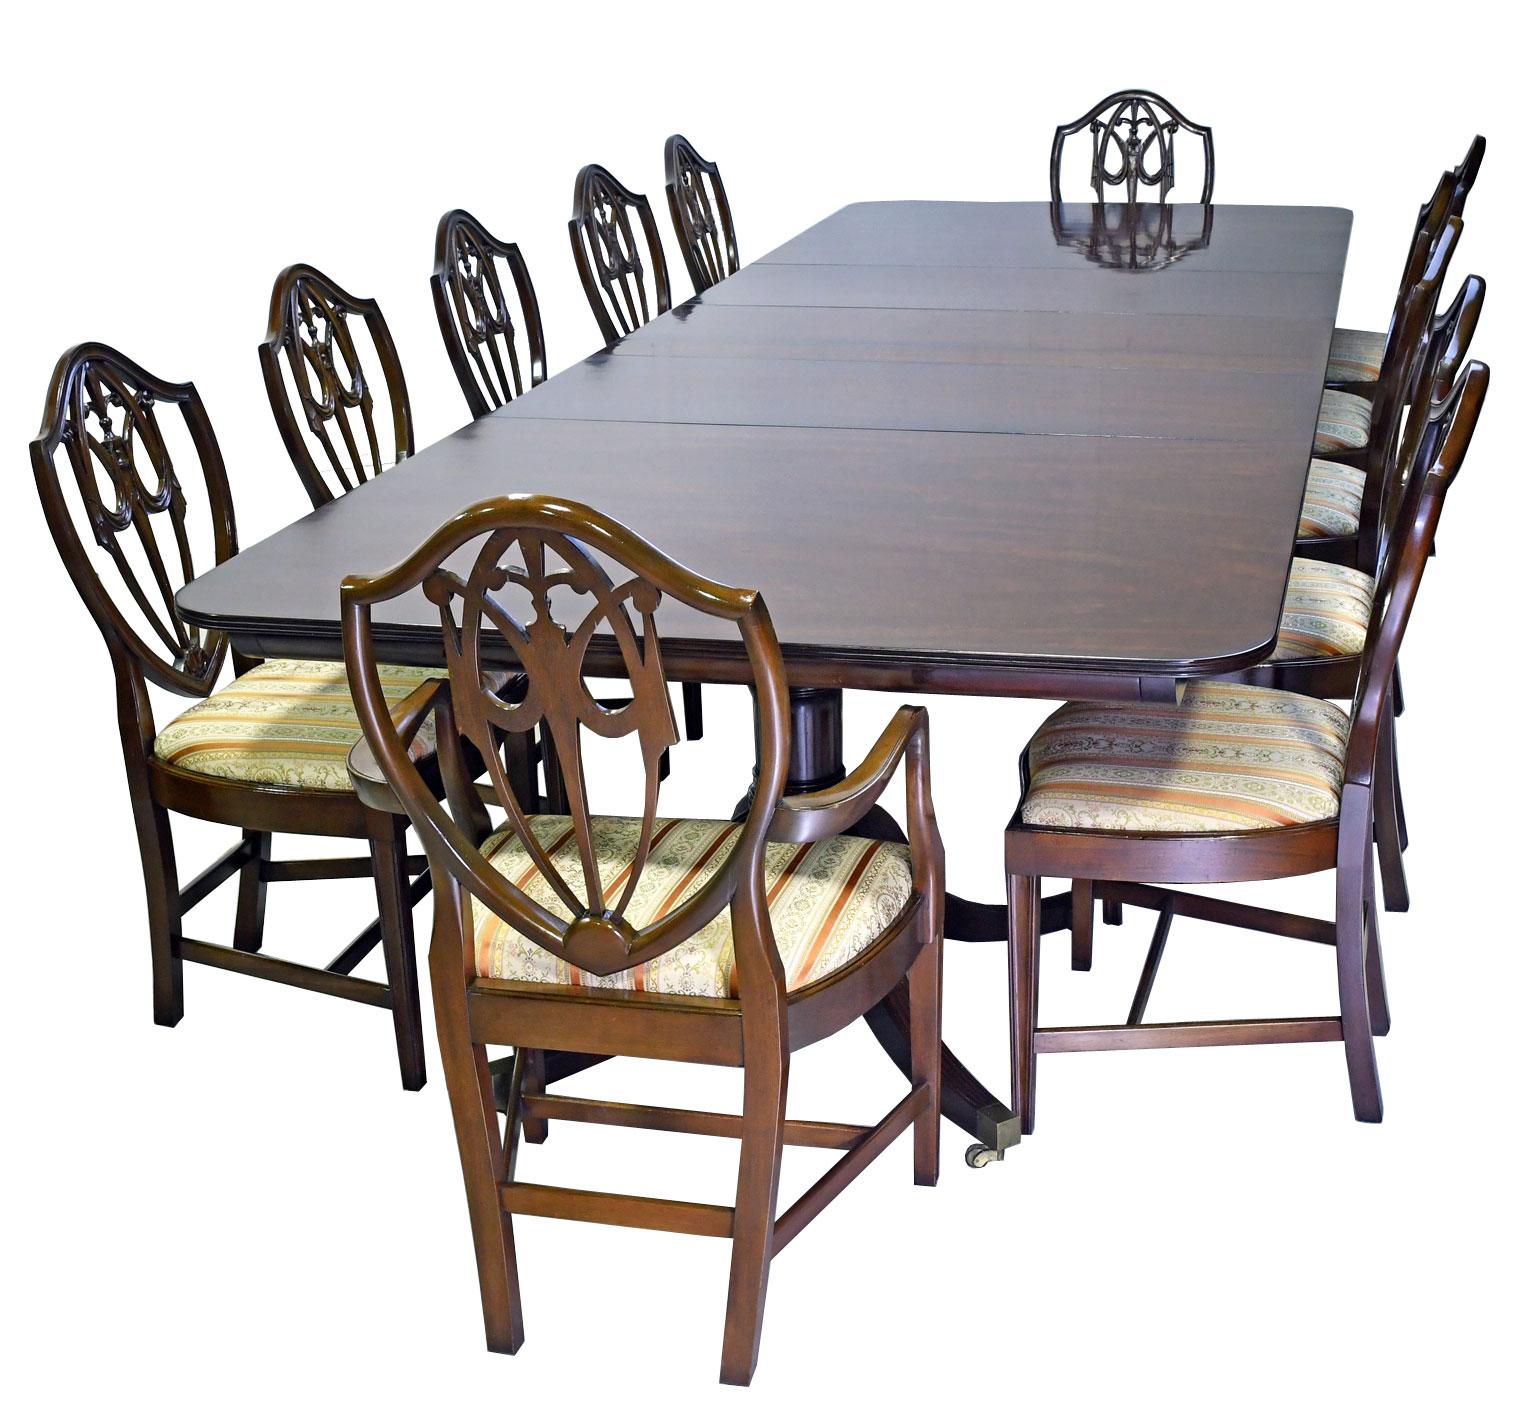 12' Hepplewhite-Style Dining Table Mahogany, 2 Pedestals, 3 Leaves, circa 1945 5